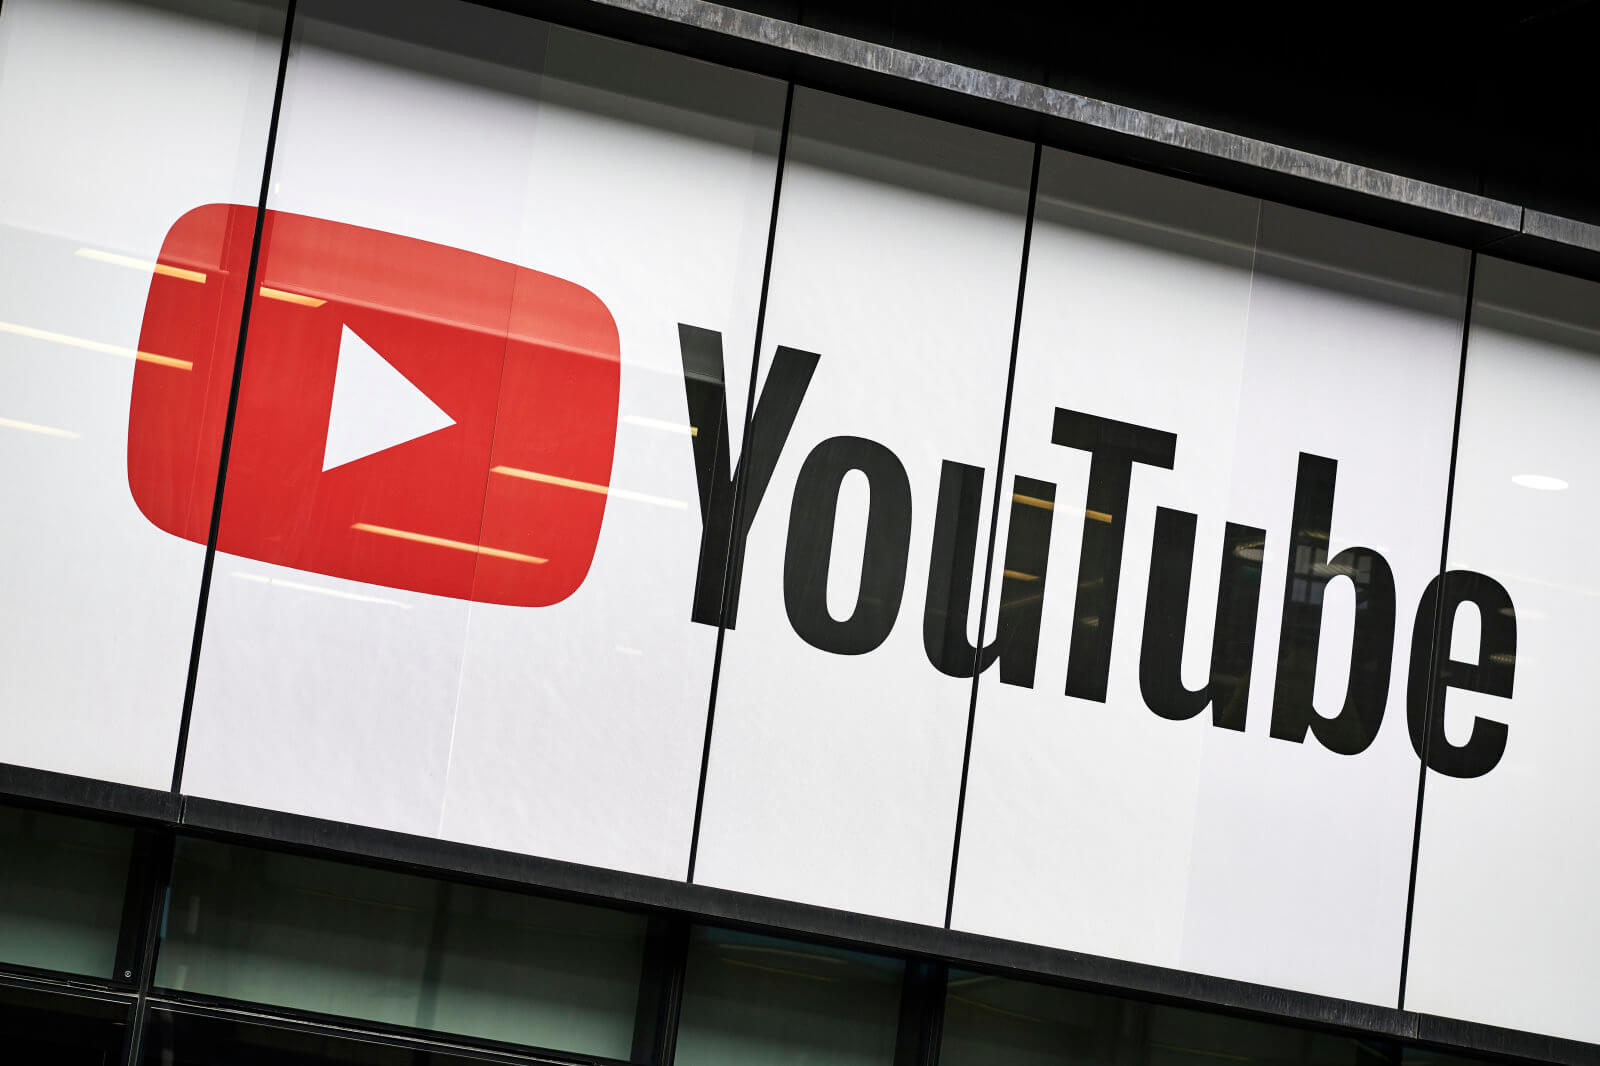 YouTube CEO issues public apology for verification changes